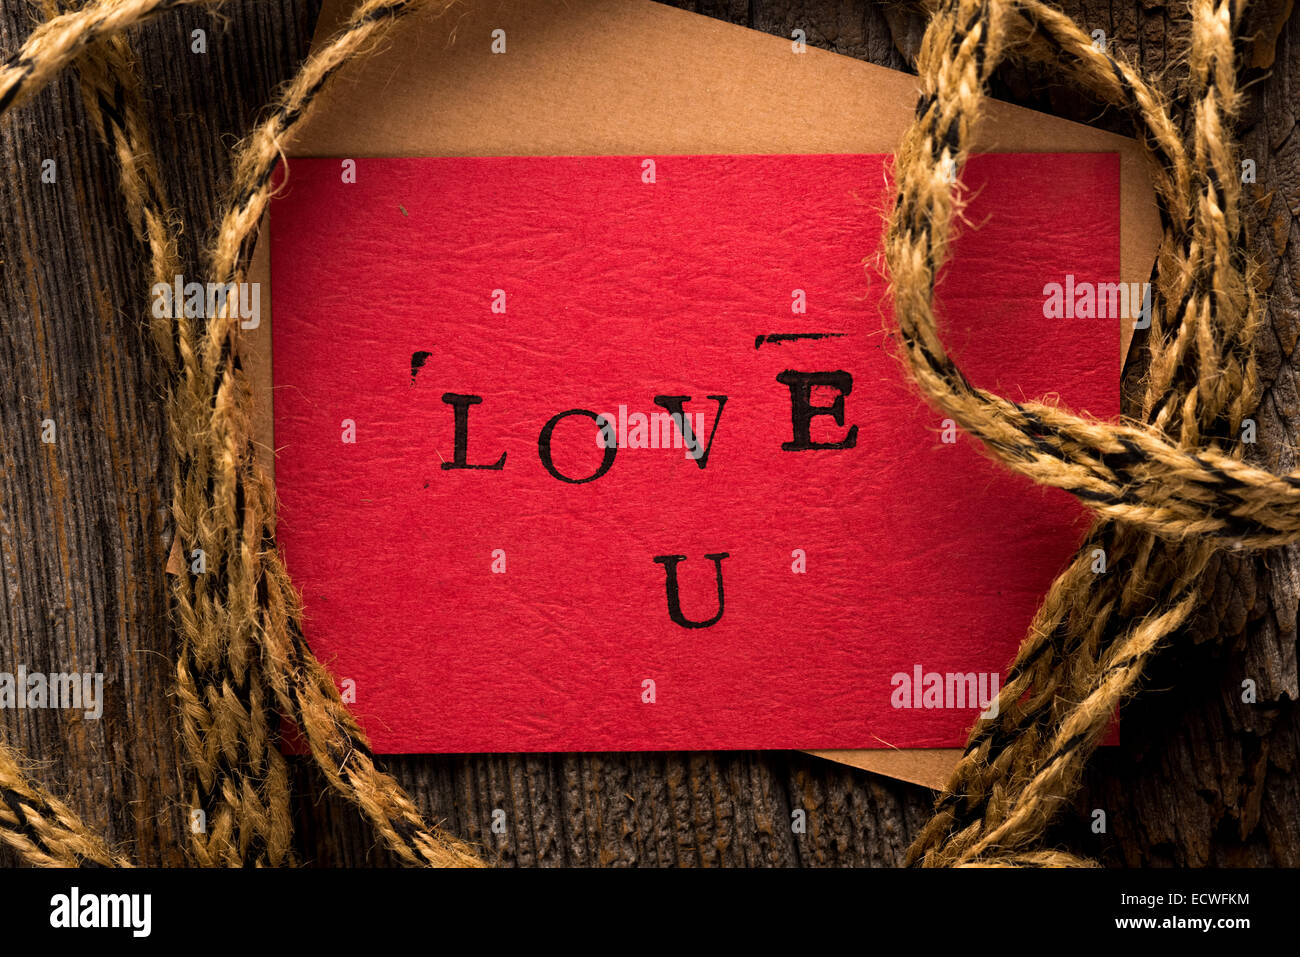 Handmade stamped valentine's day card with Love U stamped on it set on rustic wood wrapped with twine Stock Photo